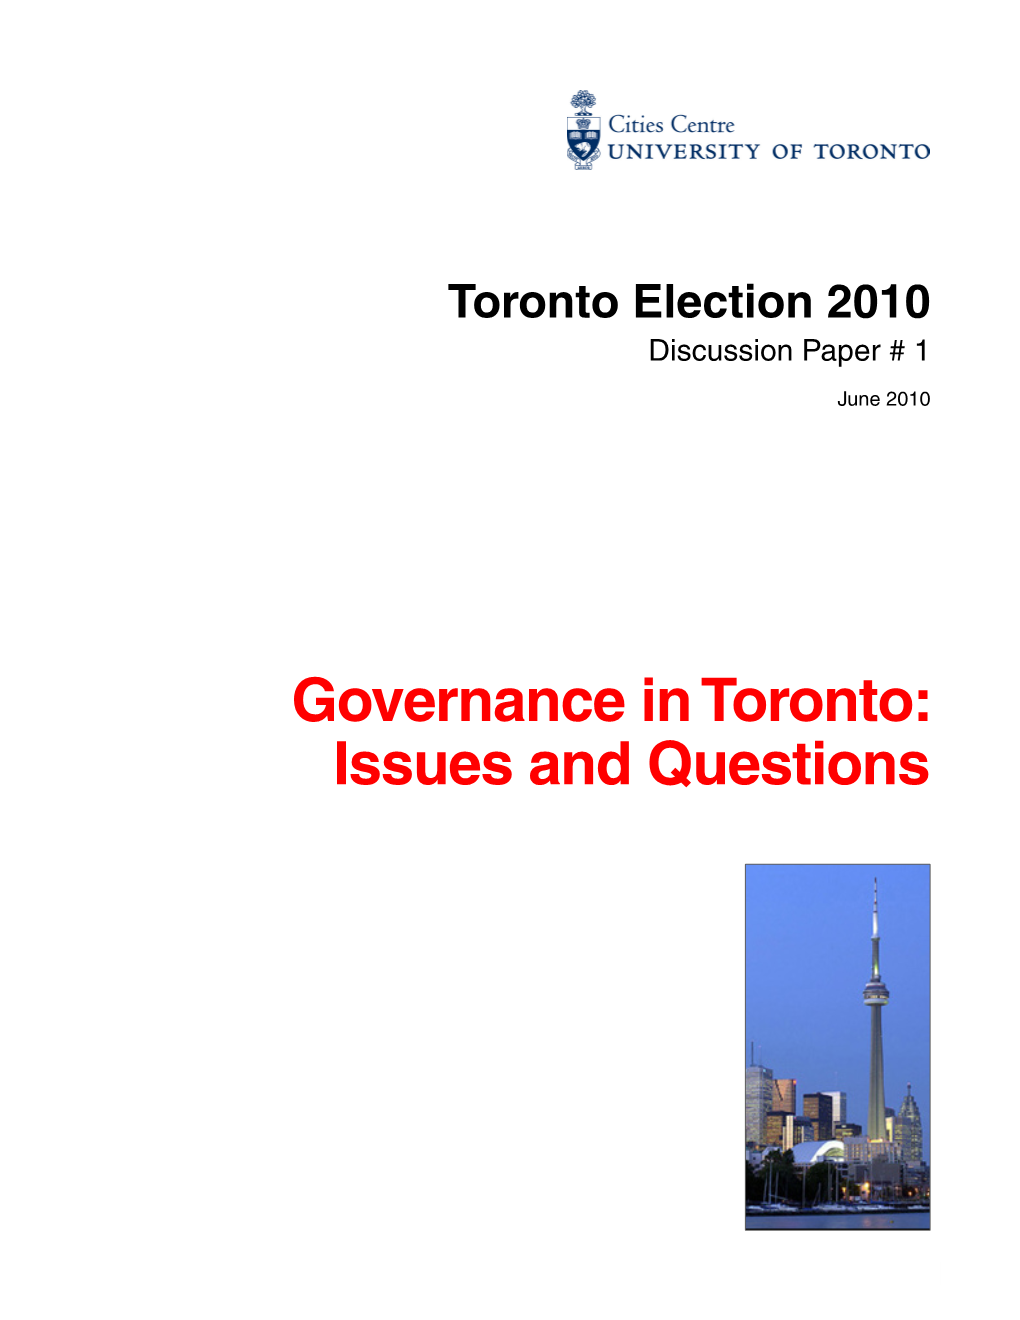 Governance in Toronto: Issues and Questions